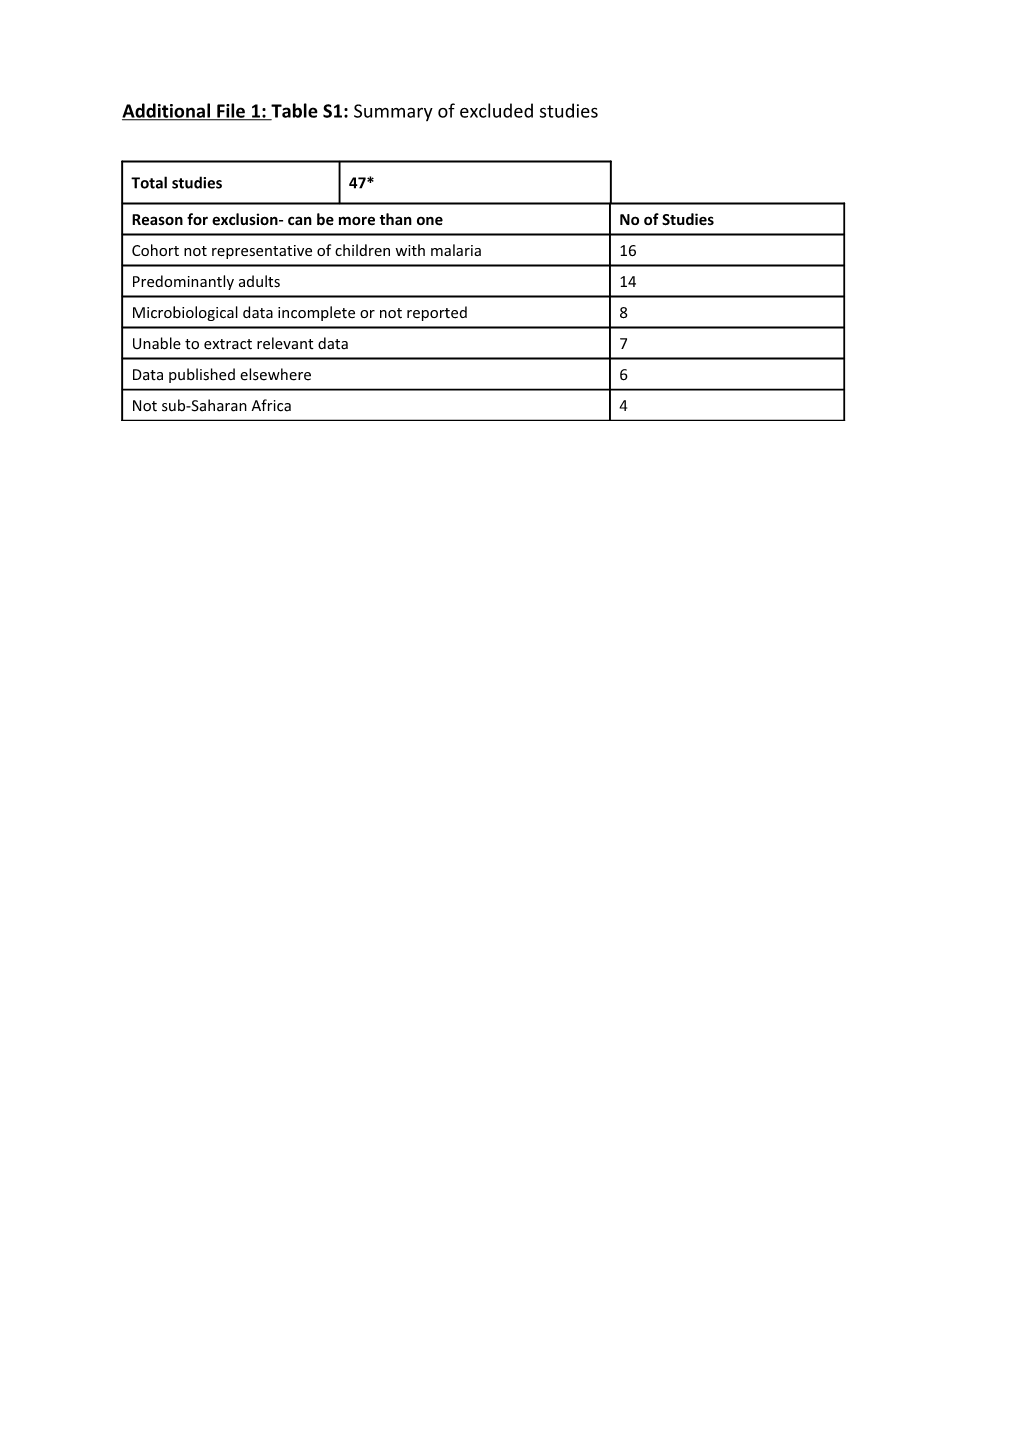 Table S2: Excluded Studies Referring to Malaria and Invasive Bacterial Infection